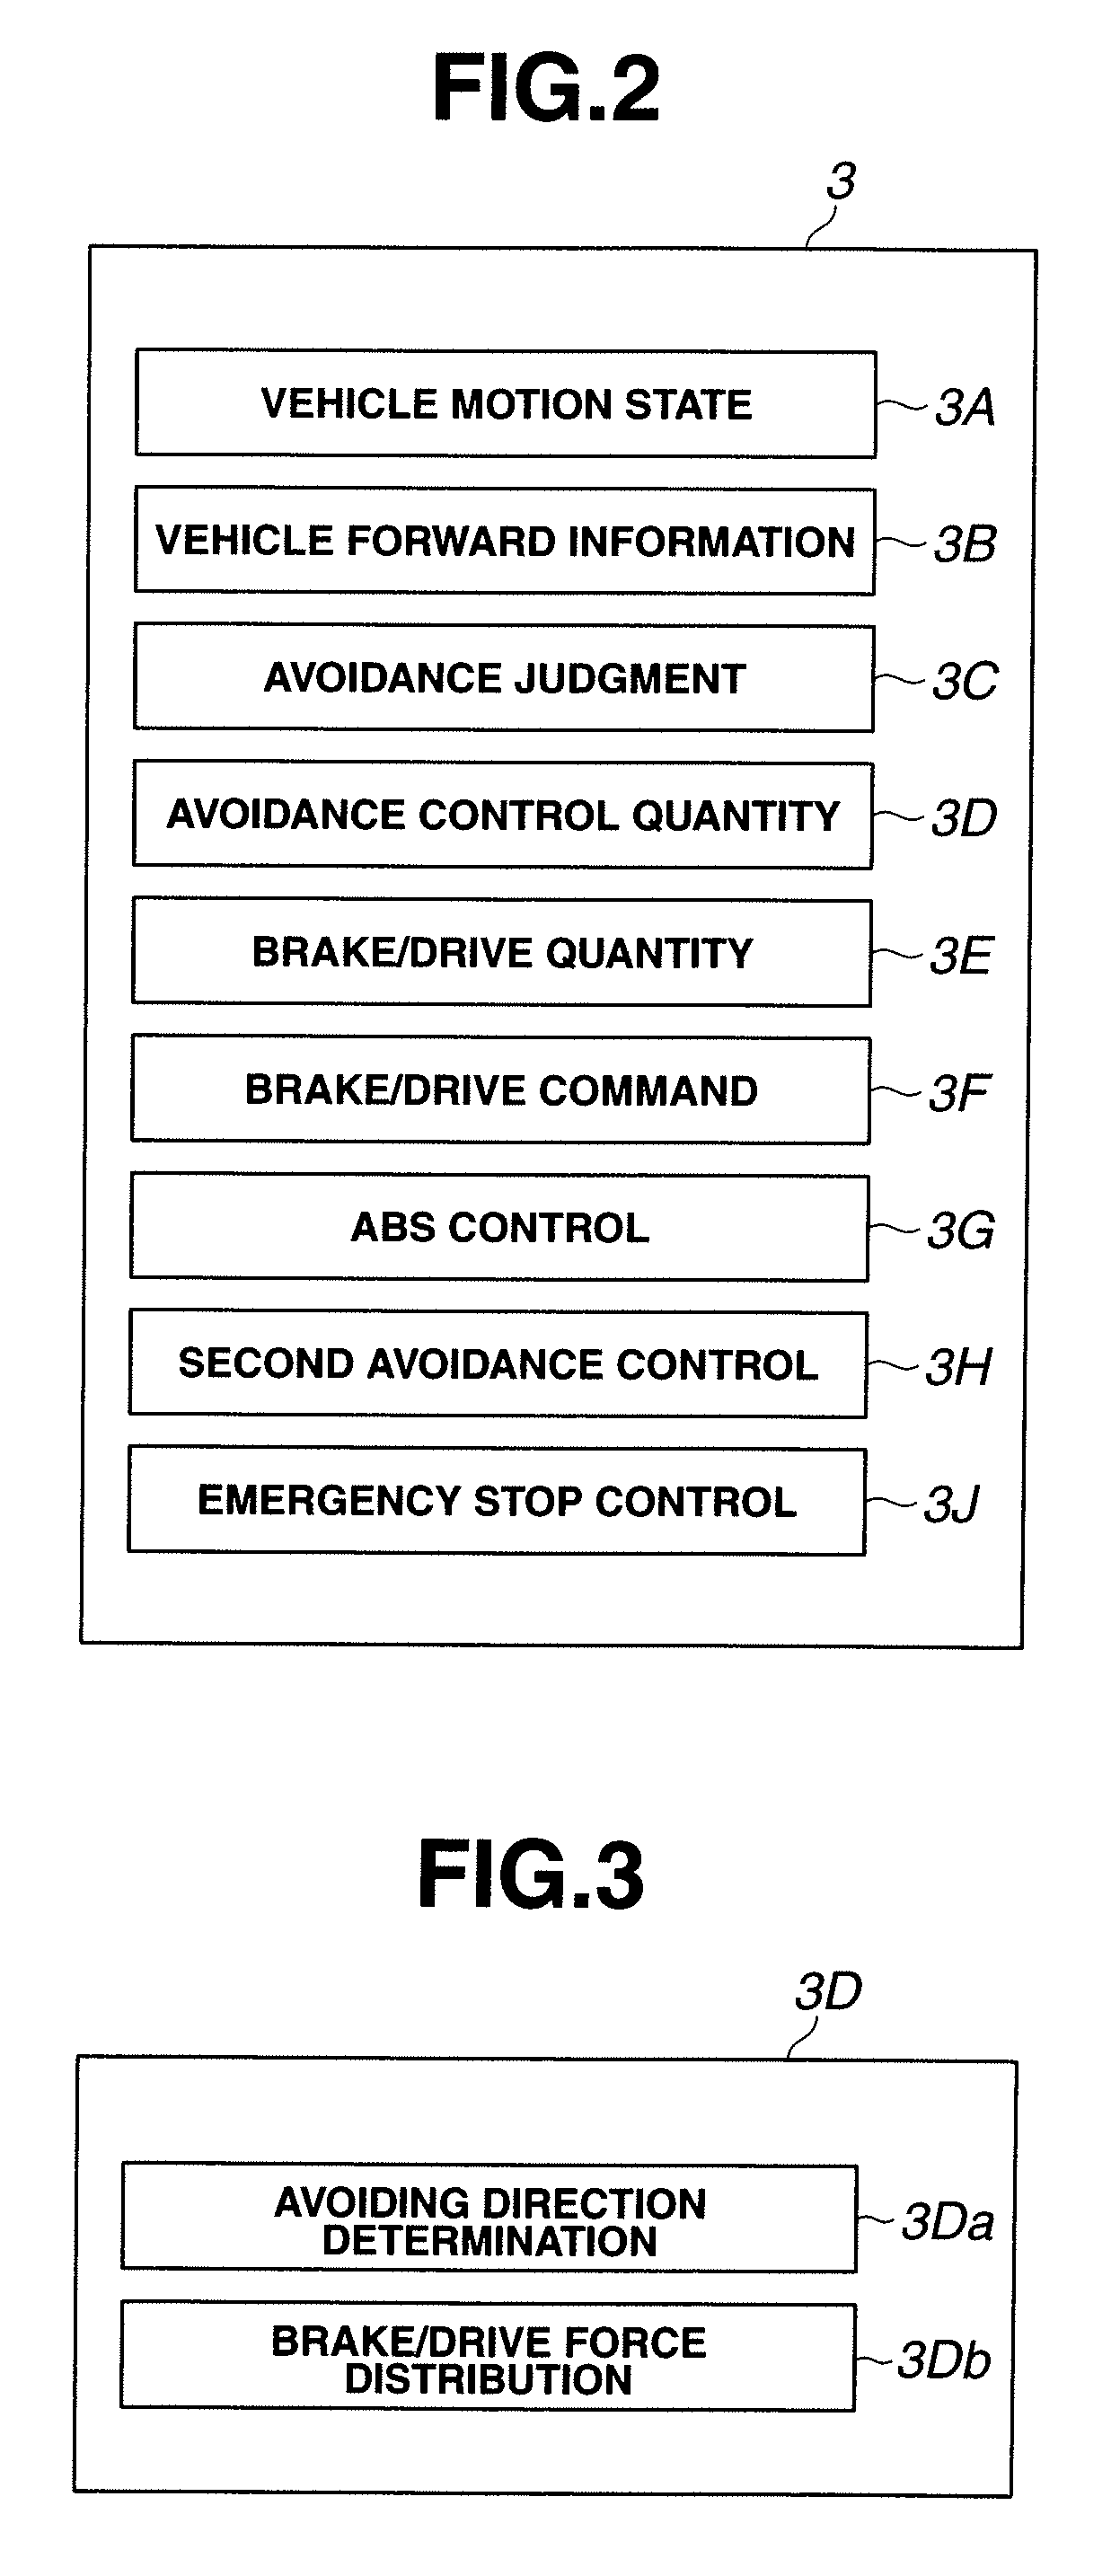 Apparatus and process for vehicle driving assistance